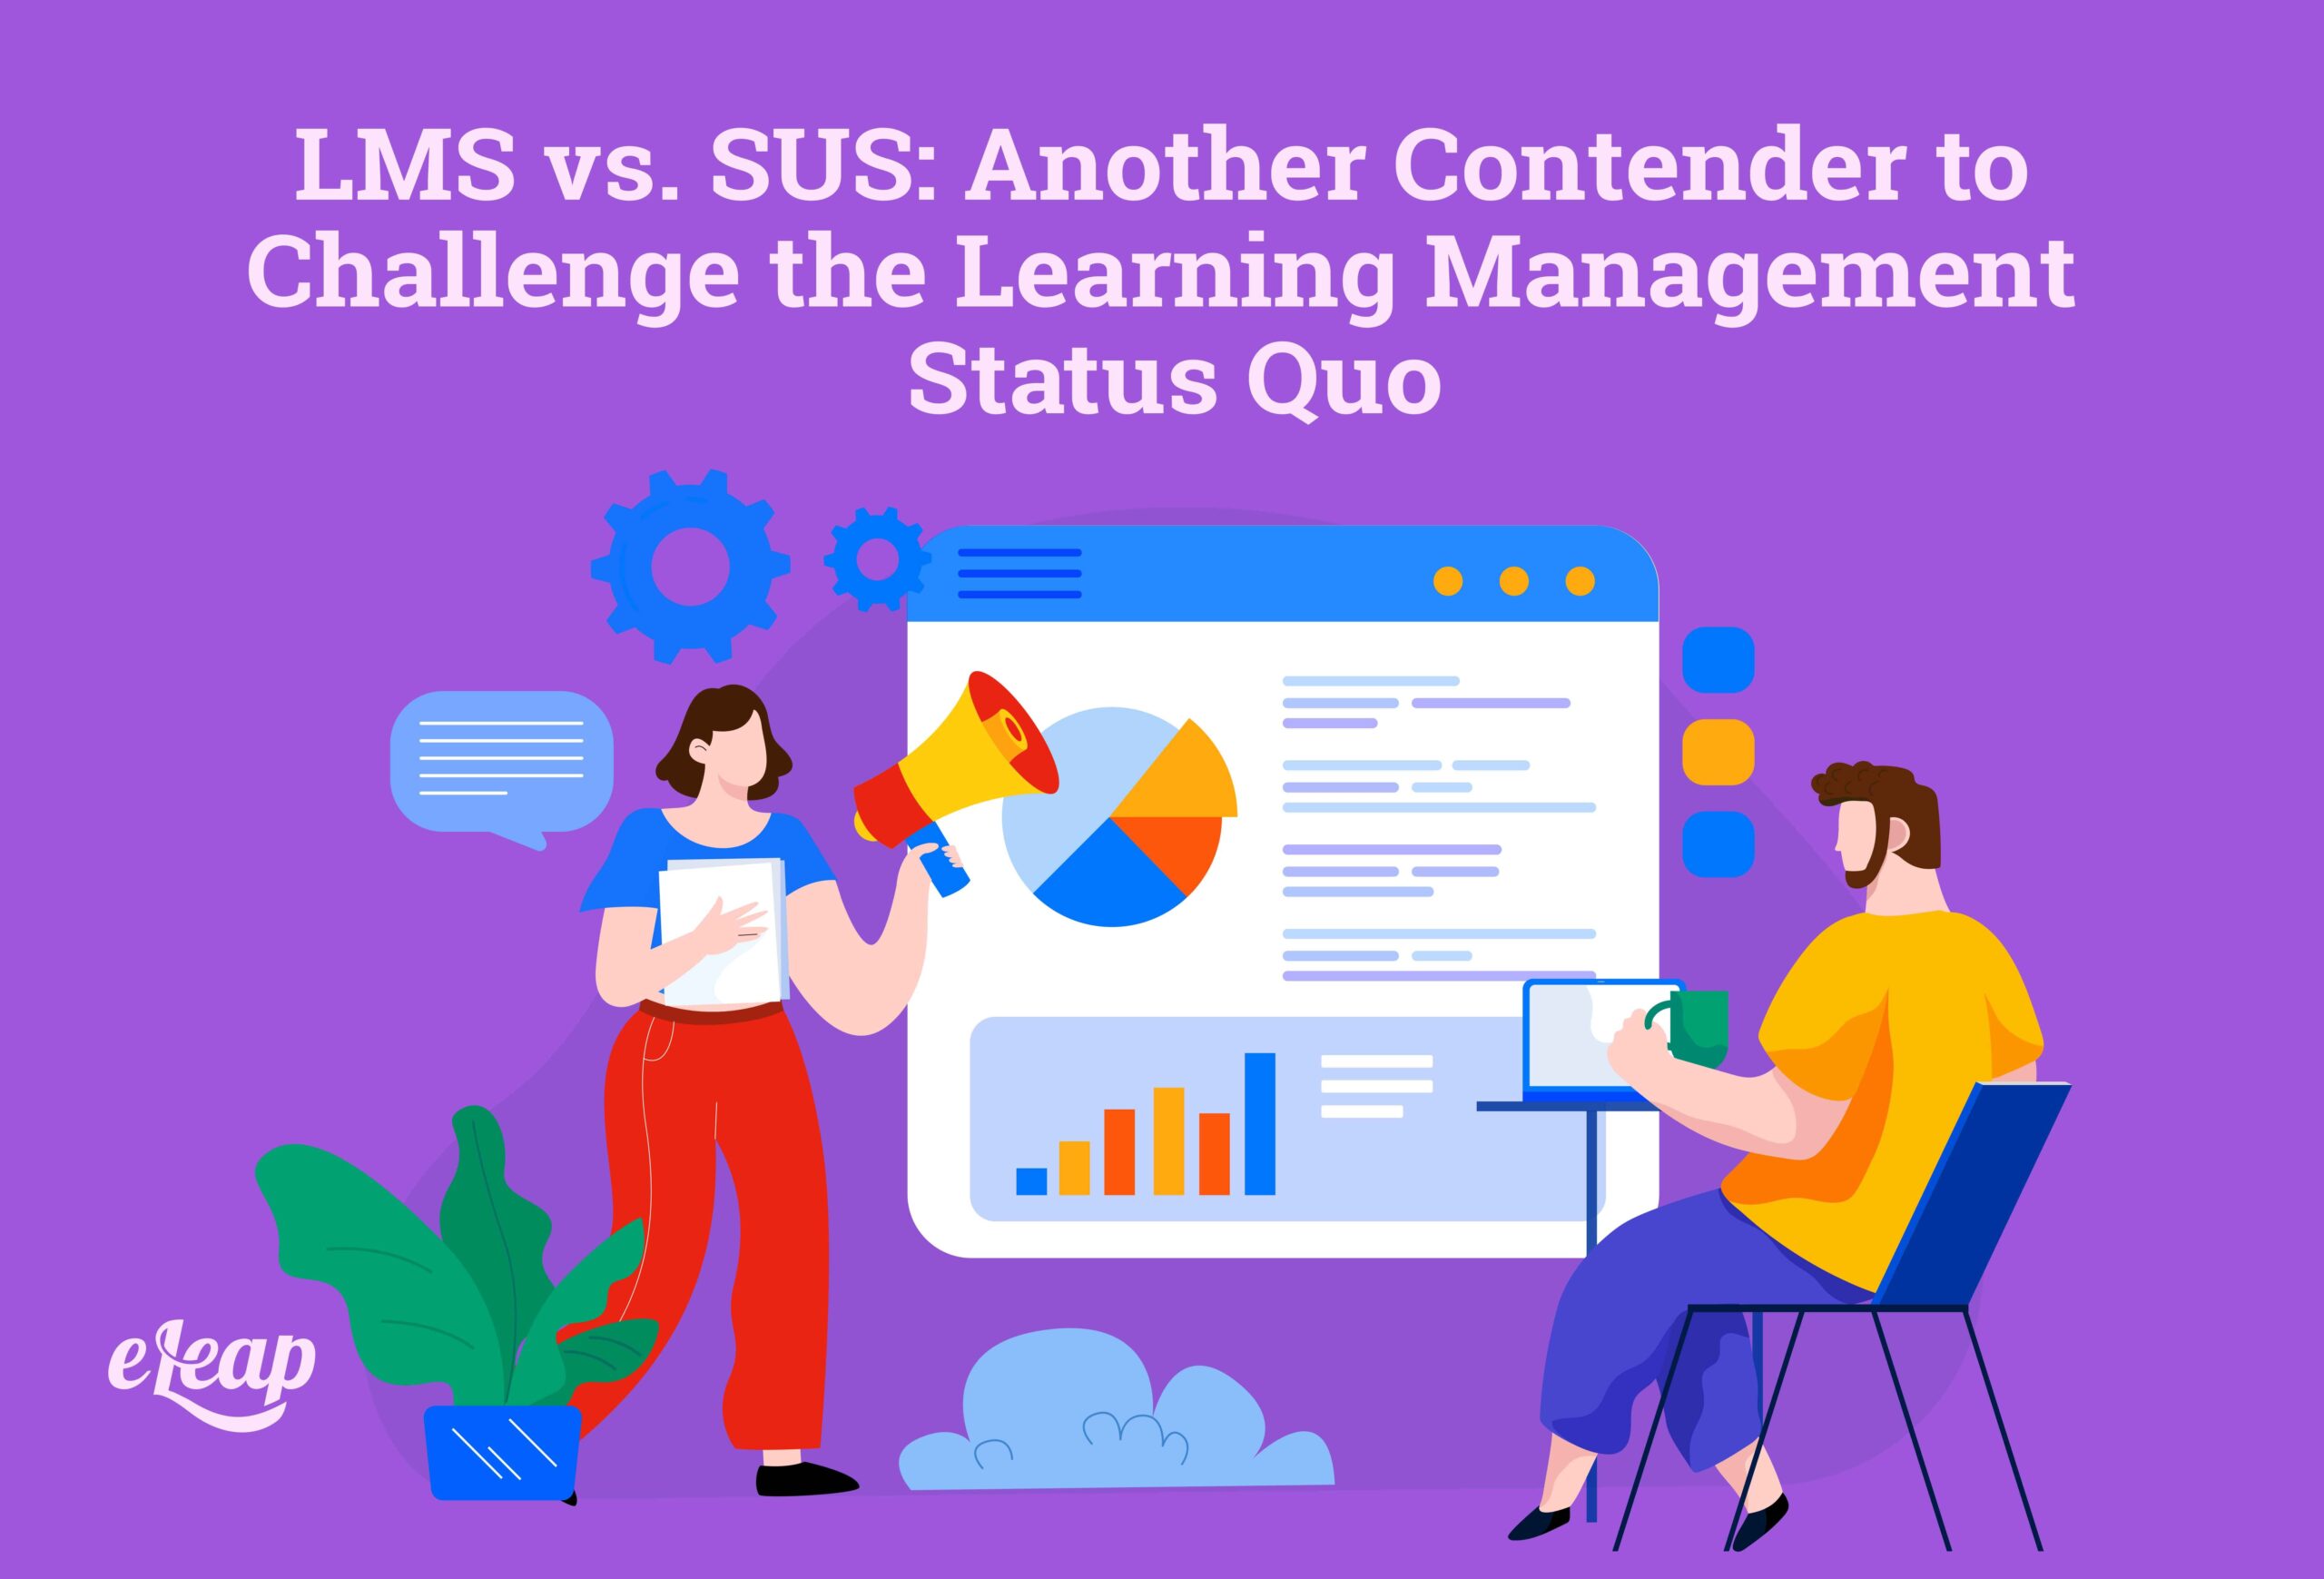 LMS vs. SUS: Another Contender to Challenge the Learning Management Status Quo